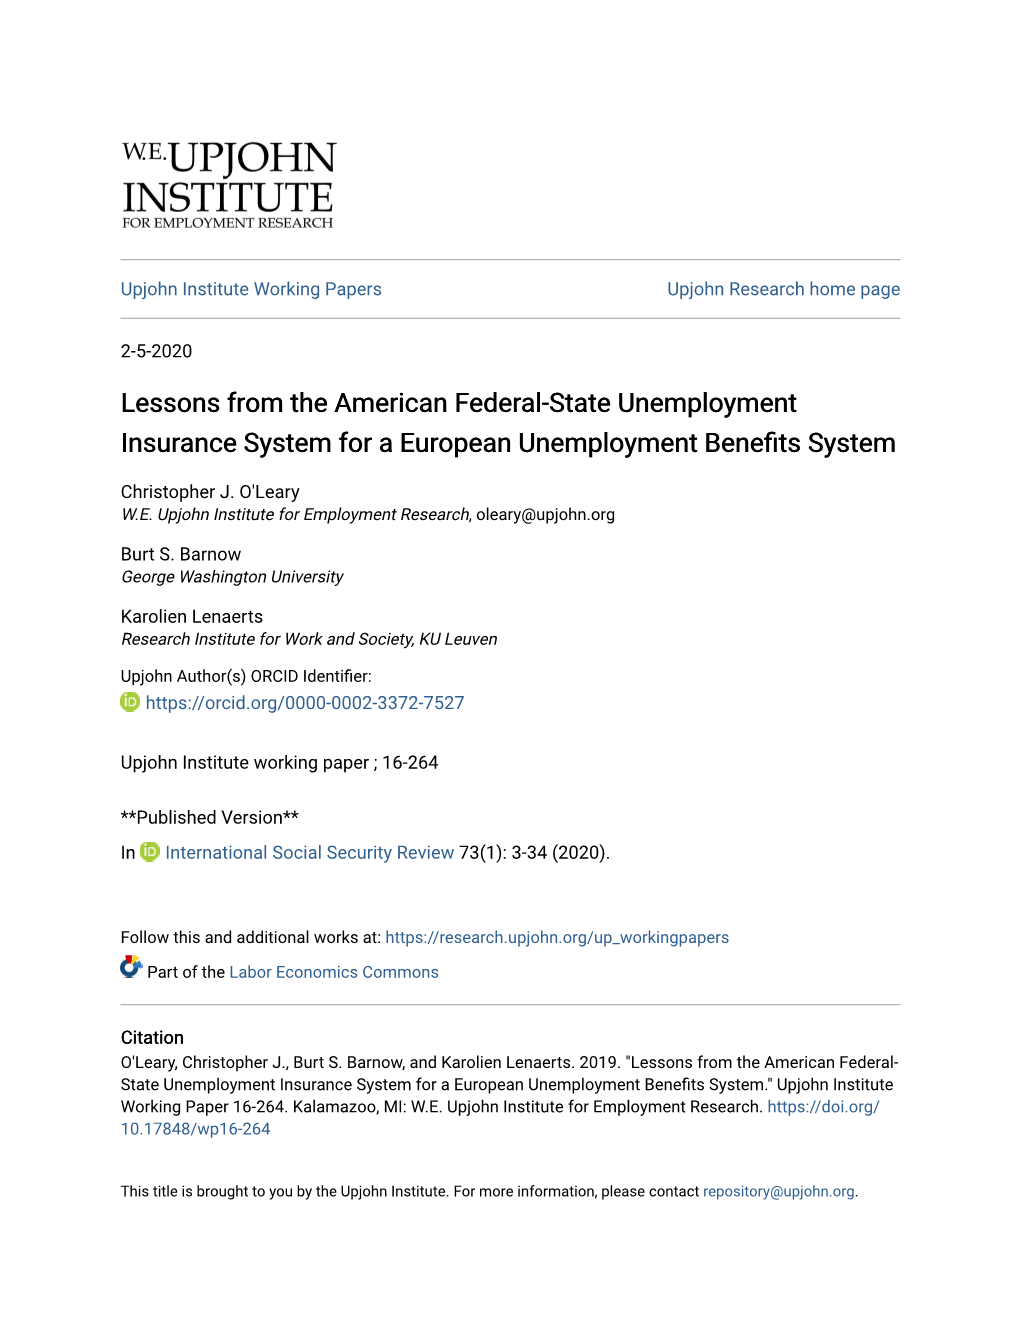 Lessons from the American Federal-State Unemployment Insurance System for a European Unemployment Benefits System